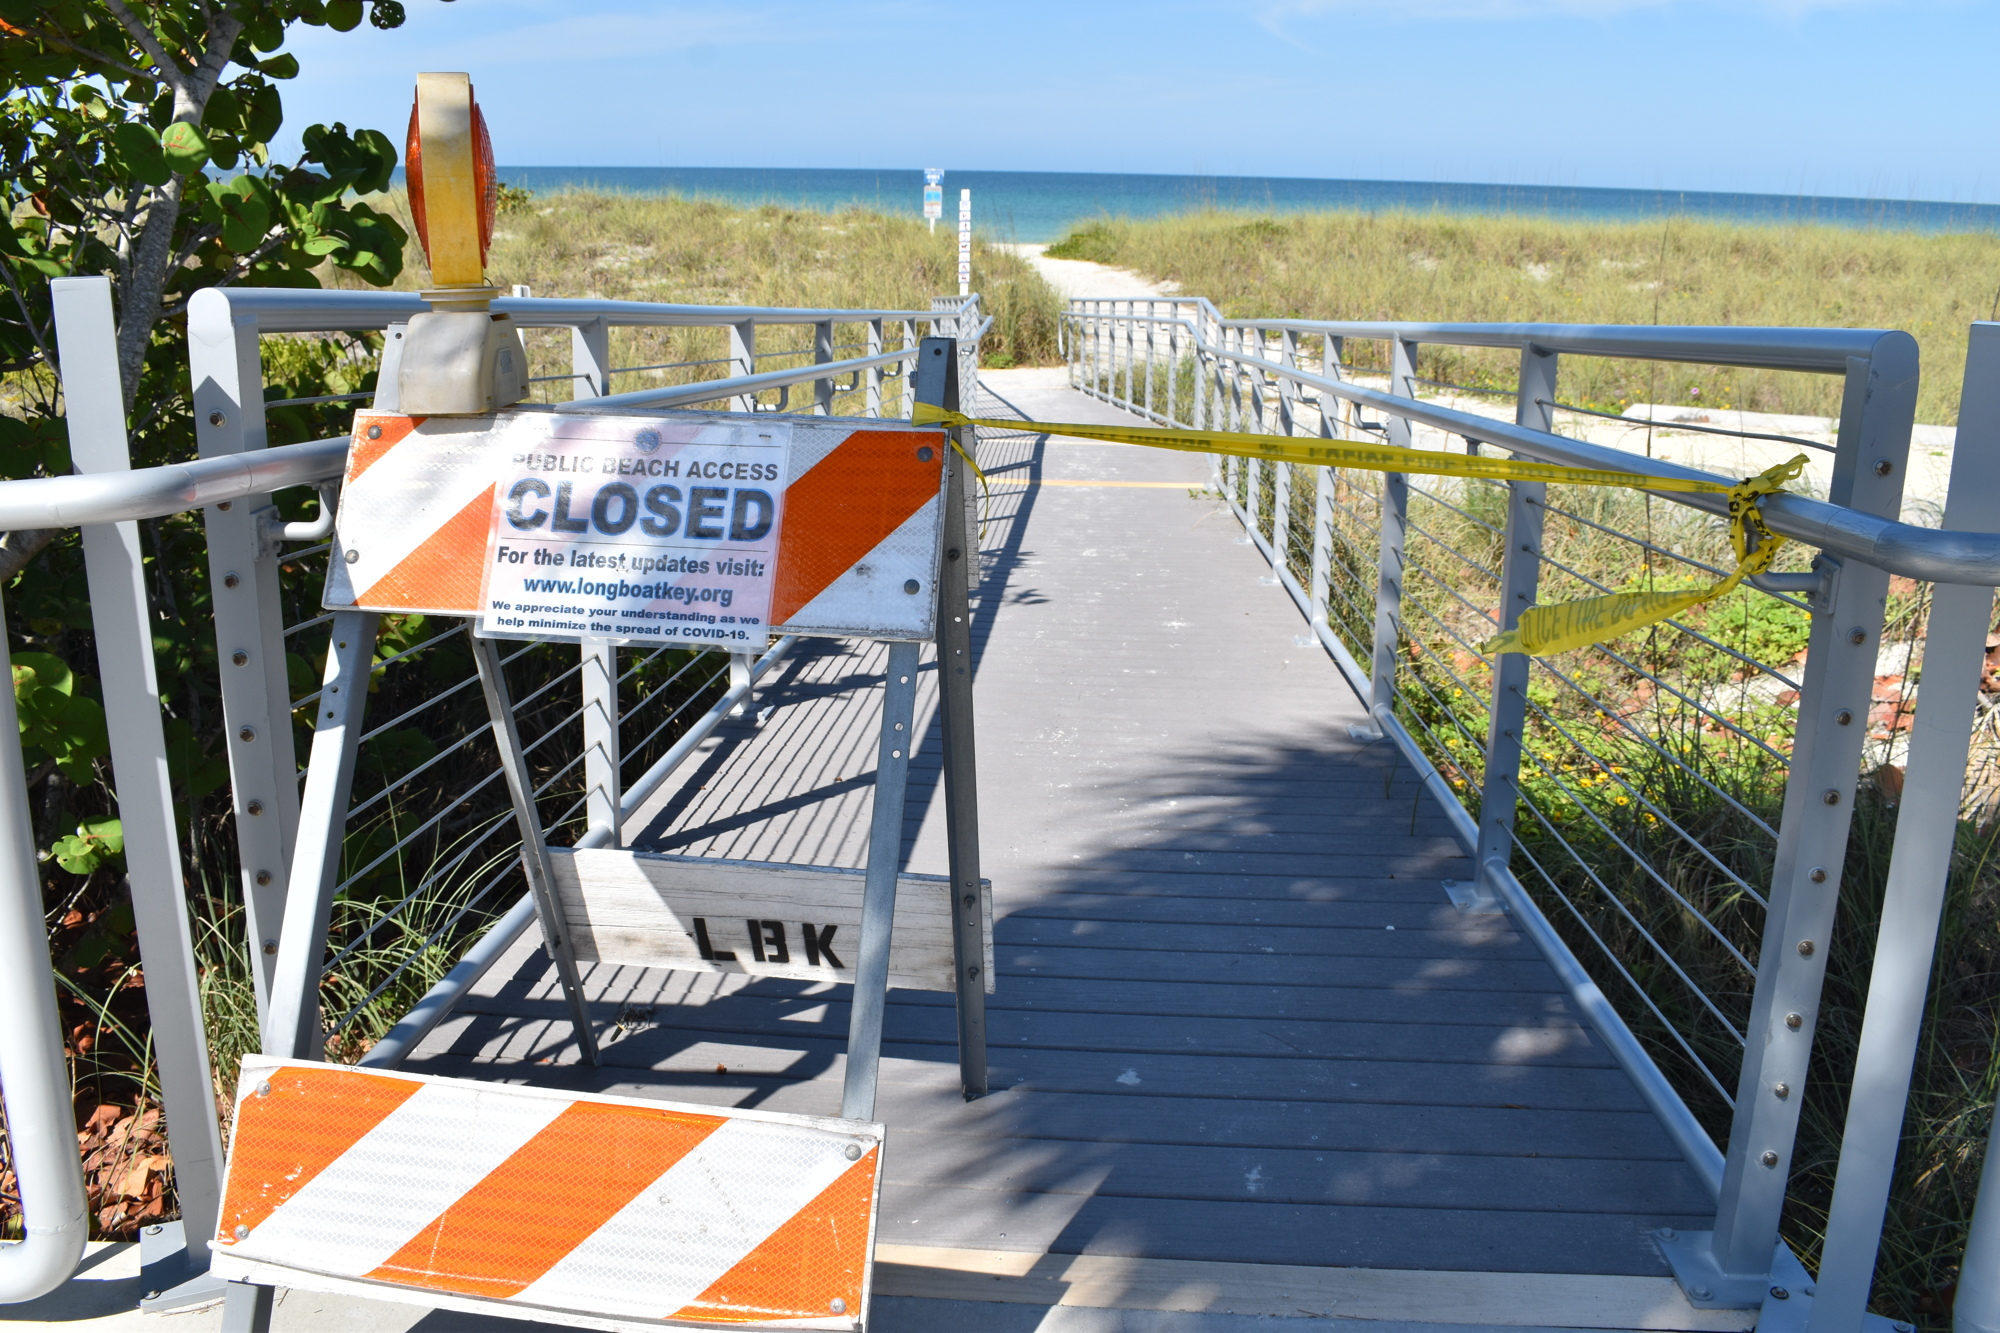 The town of Longboat Key decided to close its 12 public beach access points on March 21.